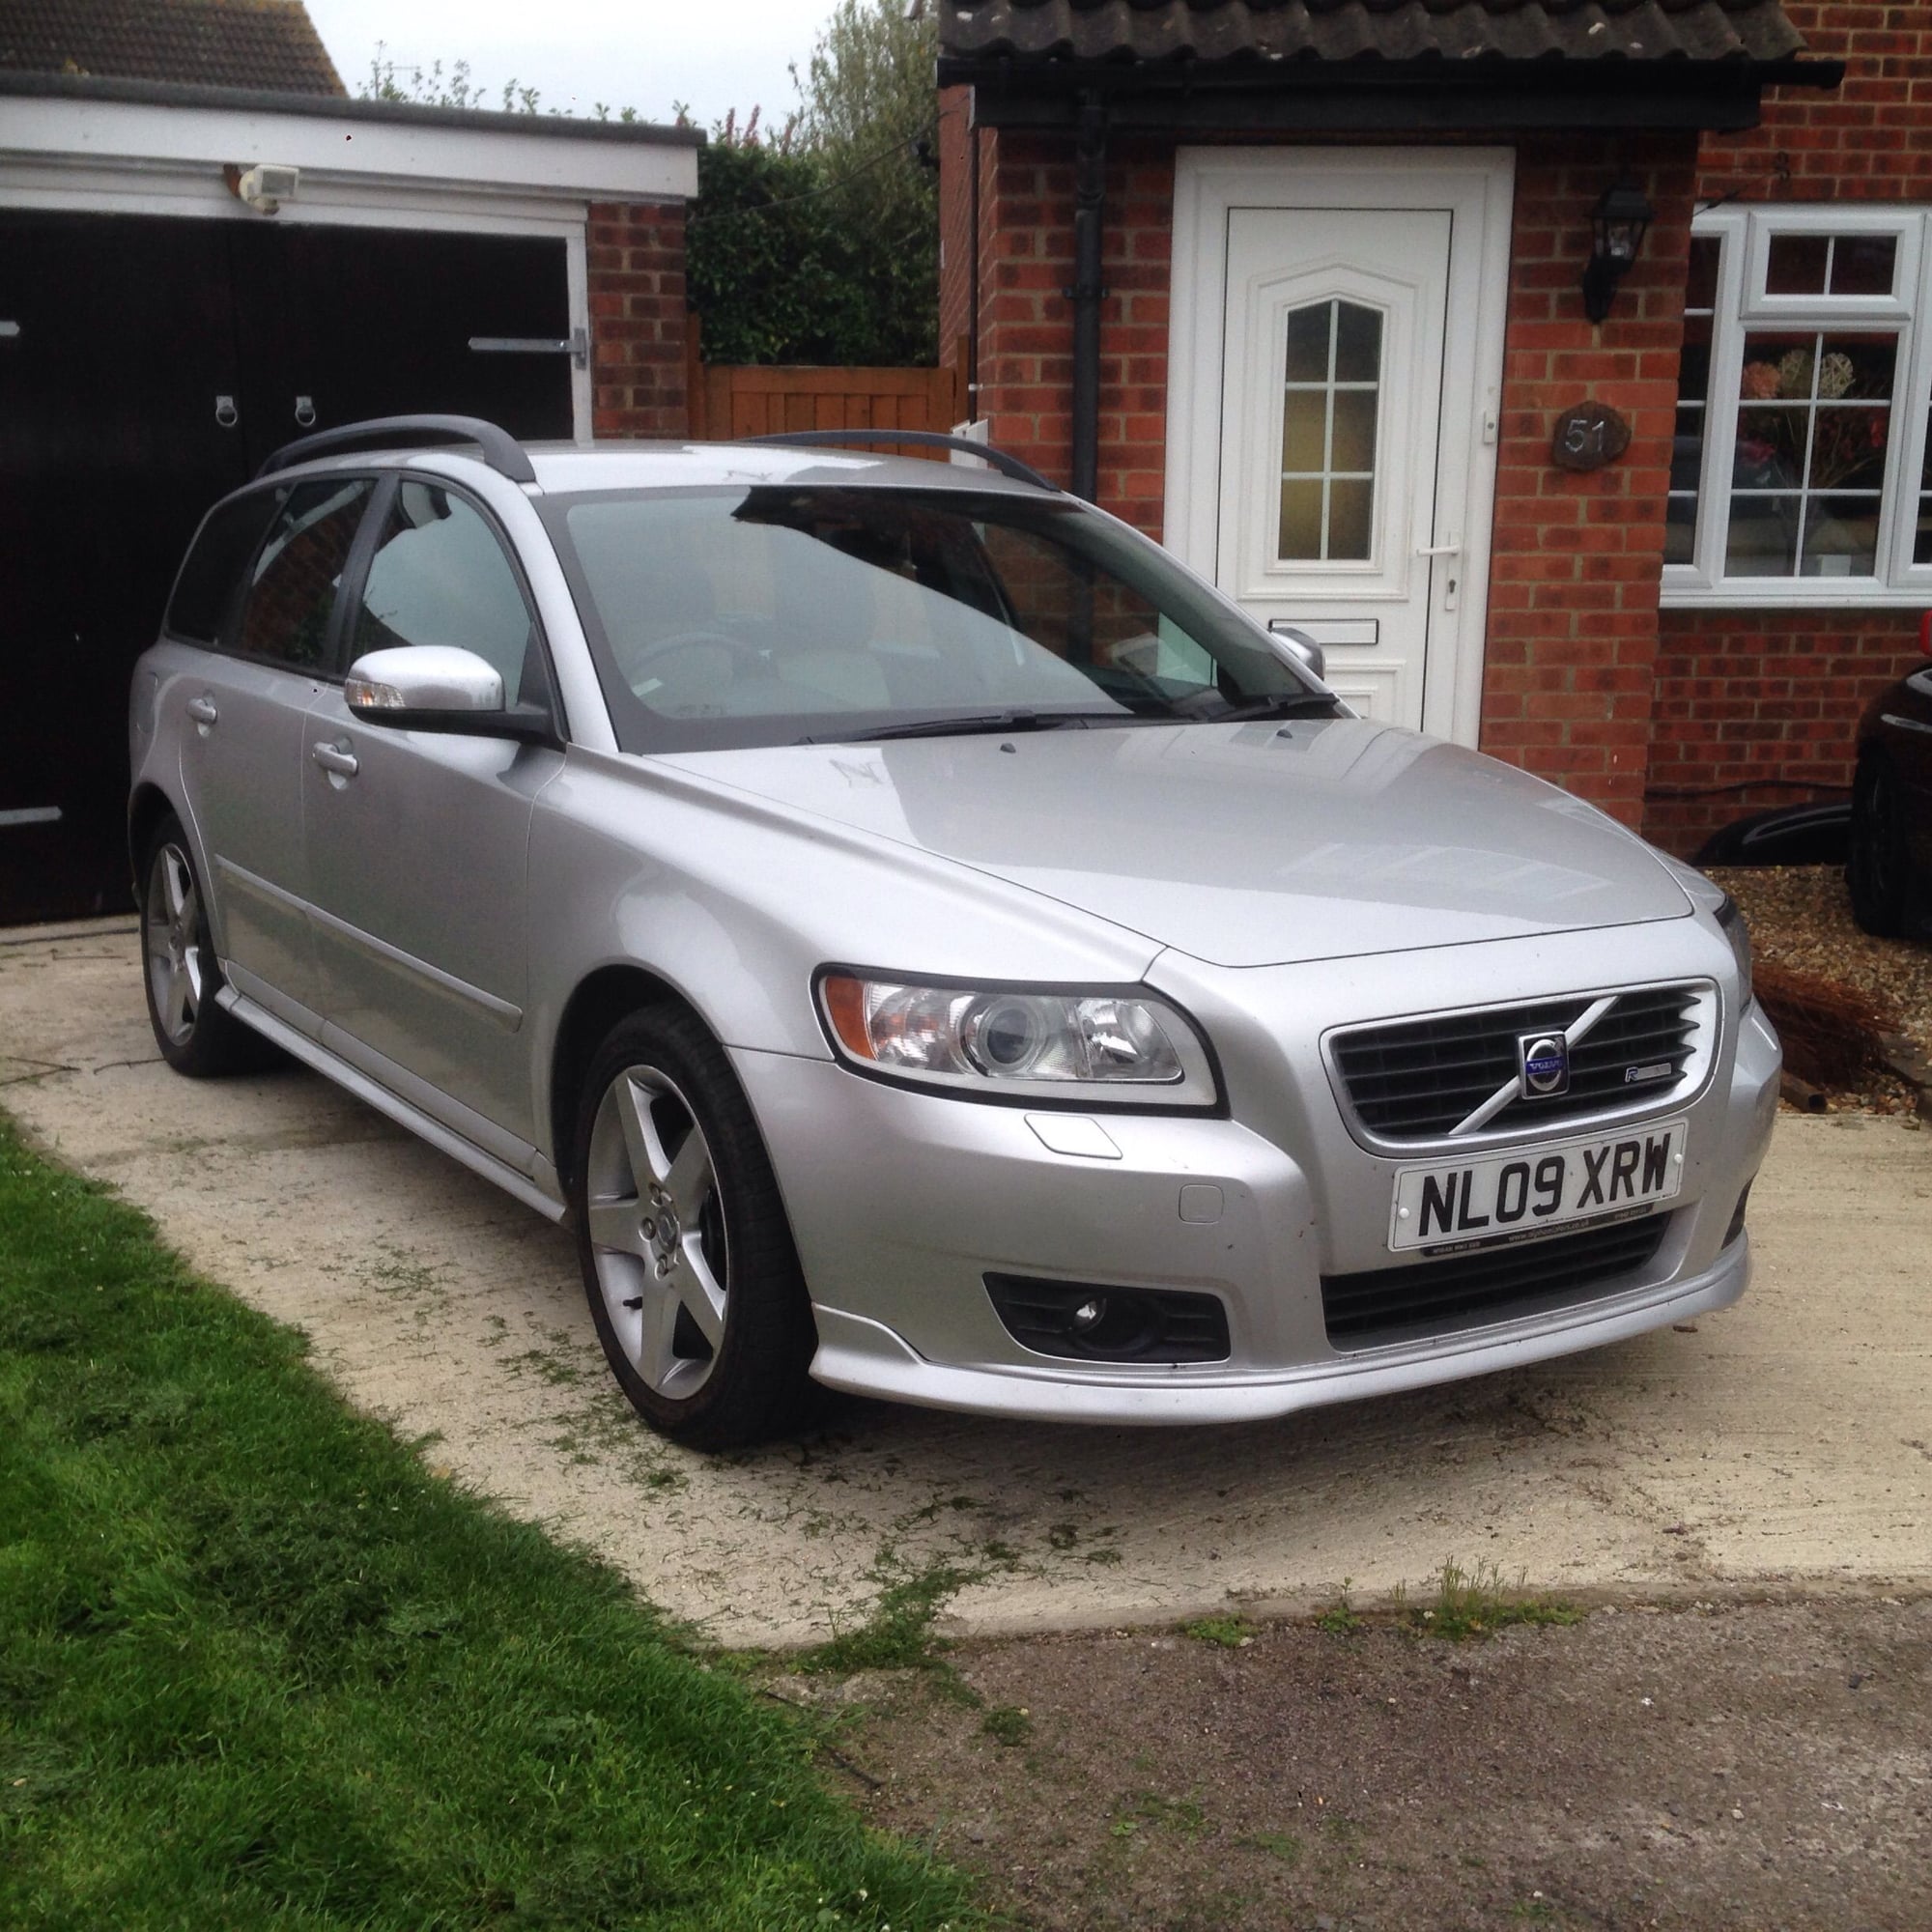 Thinking of buying a Volvo v50 any advice PassionFord